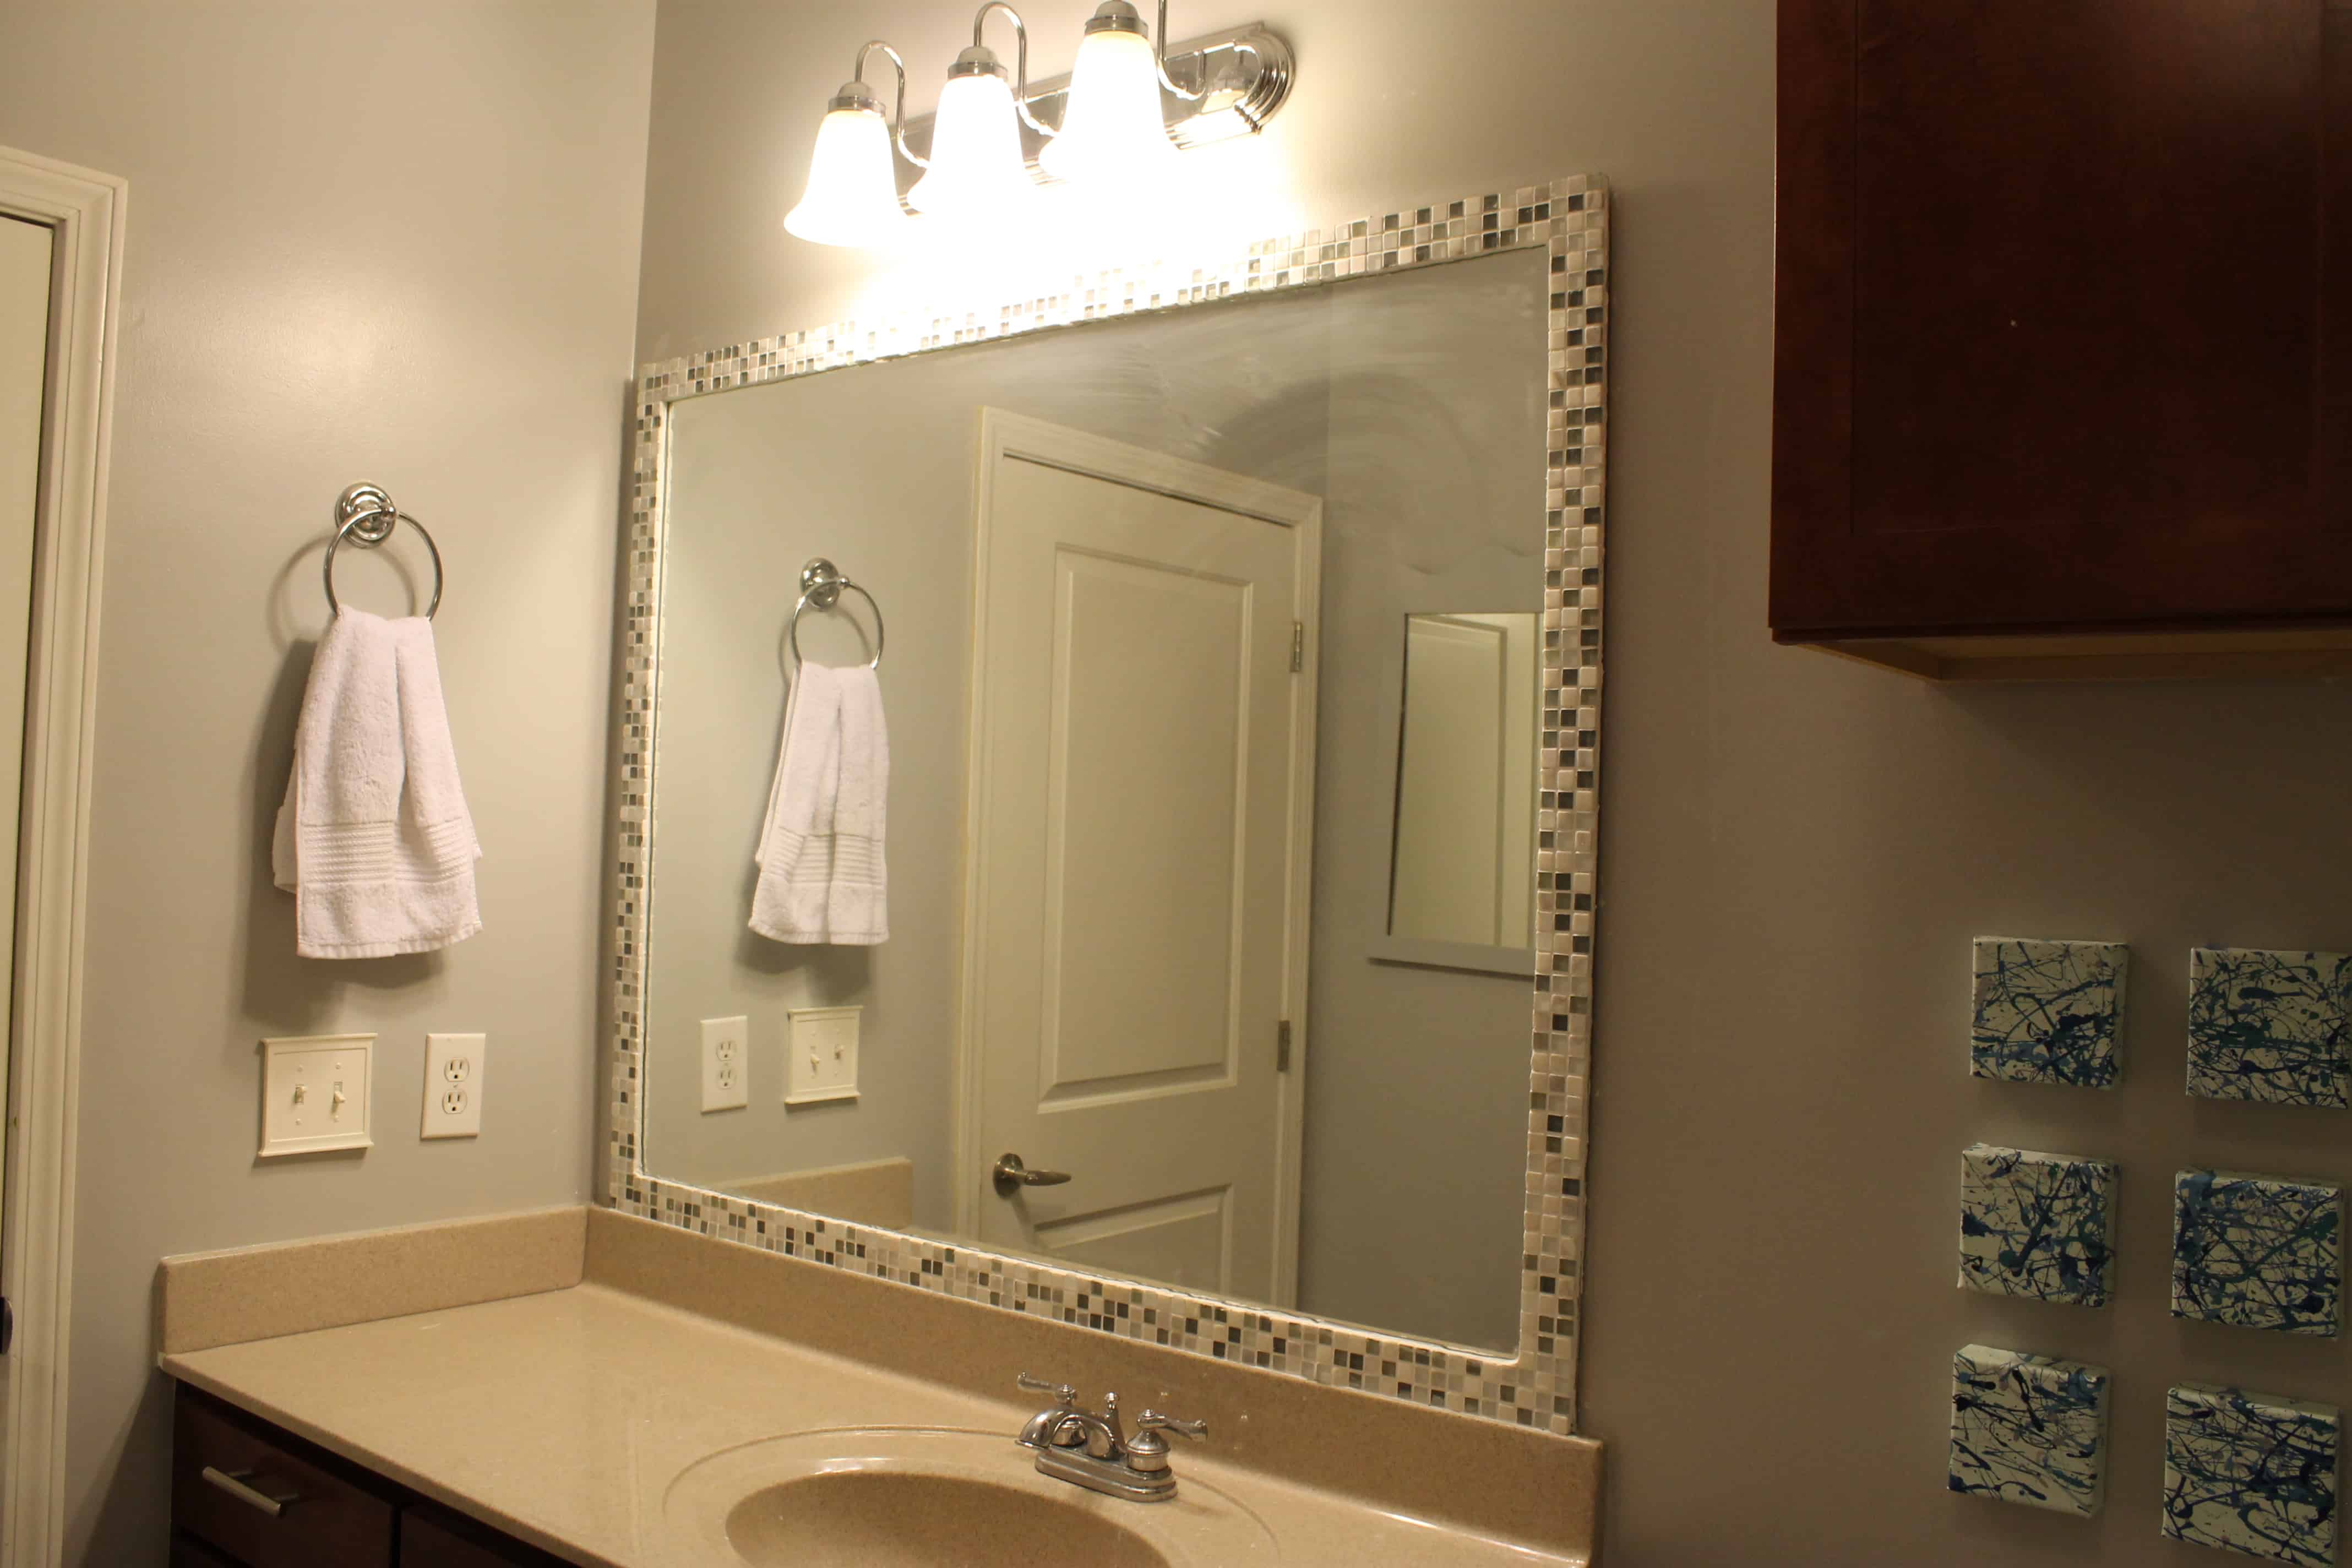 How To Frame A Mirror With Tile, Framing A Builder Grade Mirror With Tile